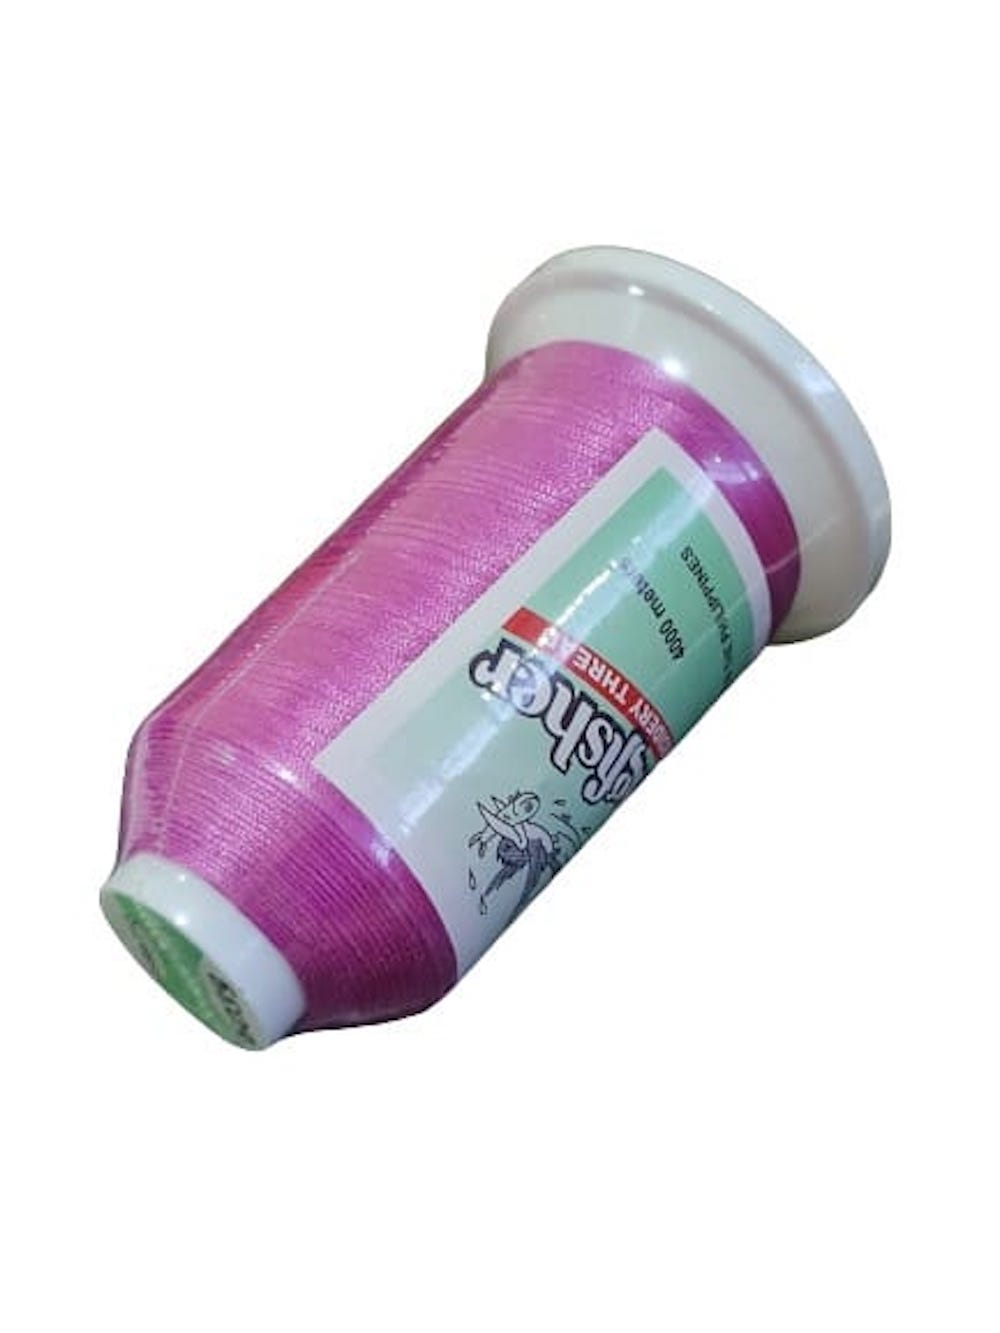 King Fisher Embroidery Thread 4000m 6039 - MY SEWING MALL